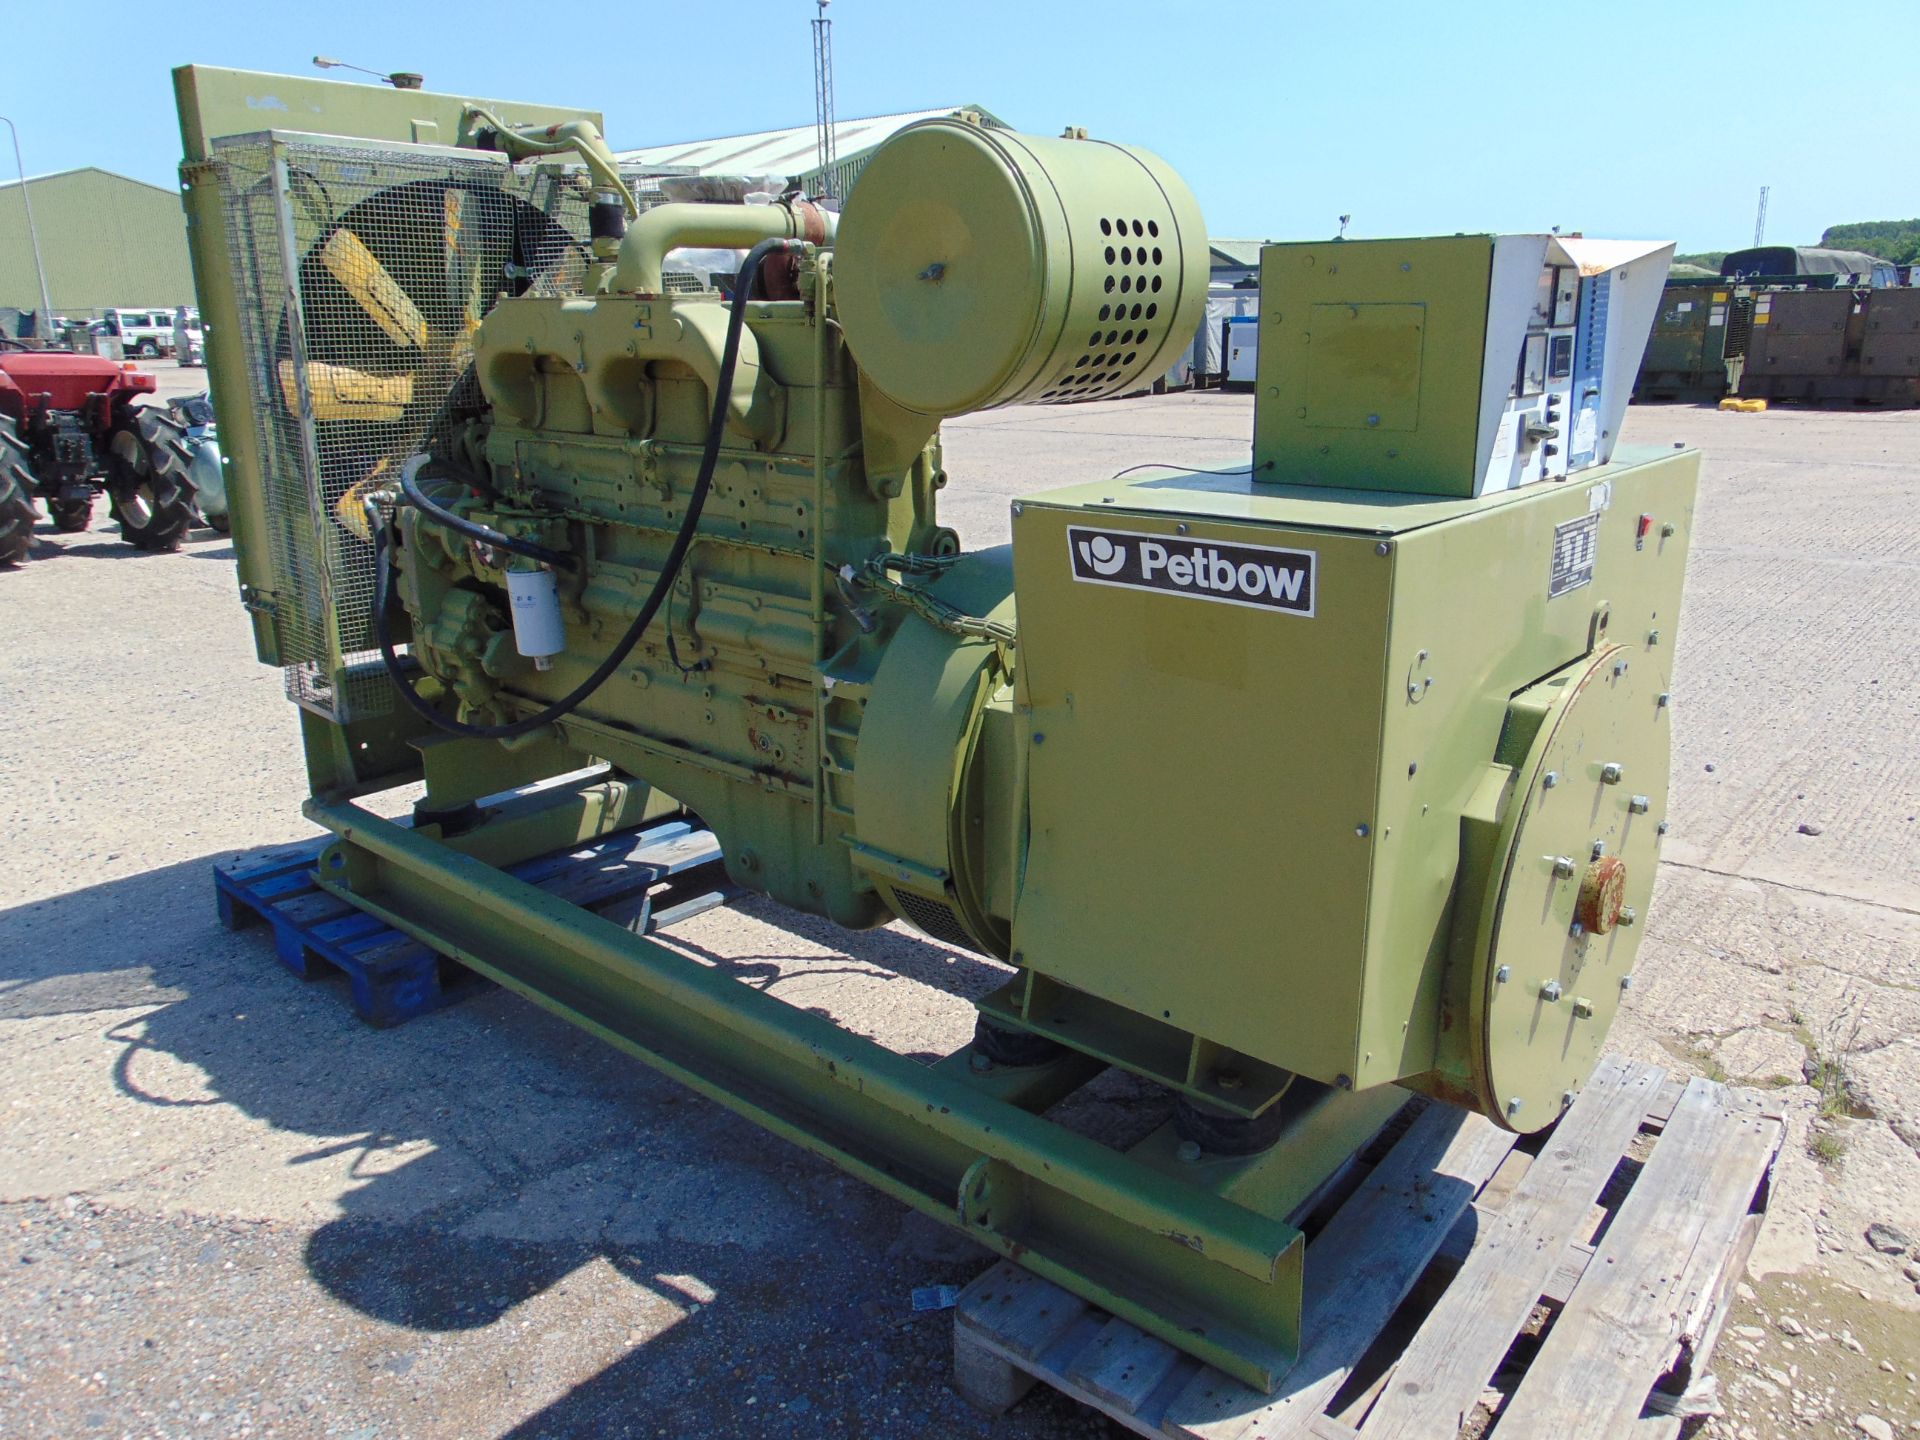 Ex Reserve Petbow BP204 255 KVA Skid Mounted Generator c/w Cummins Engine ONLY 2,122 HOURS! - Image 4 of 21